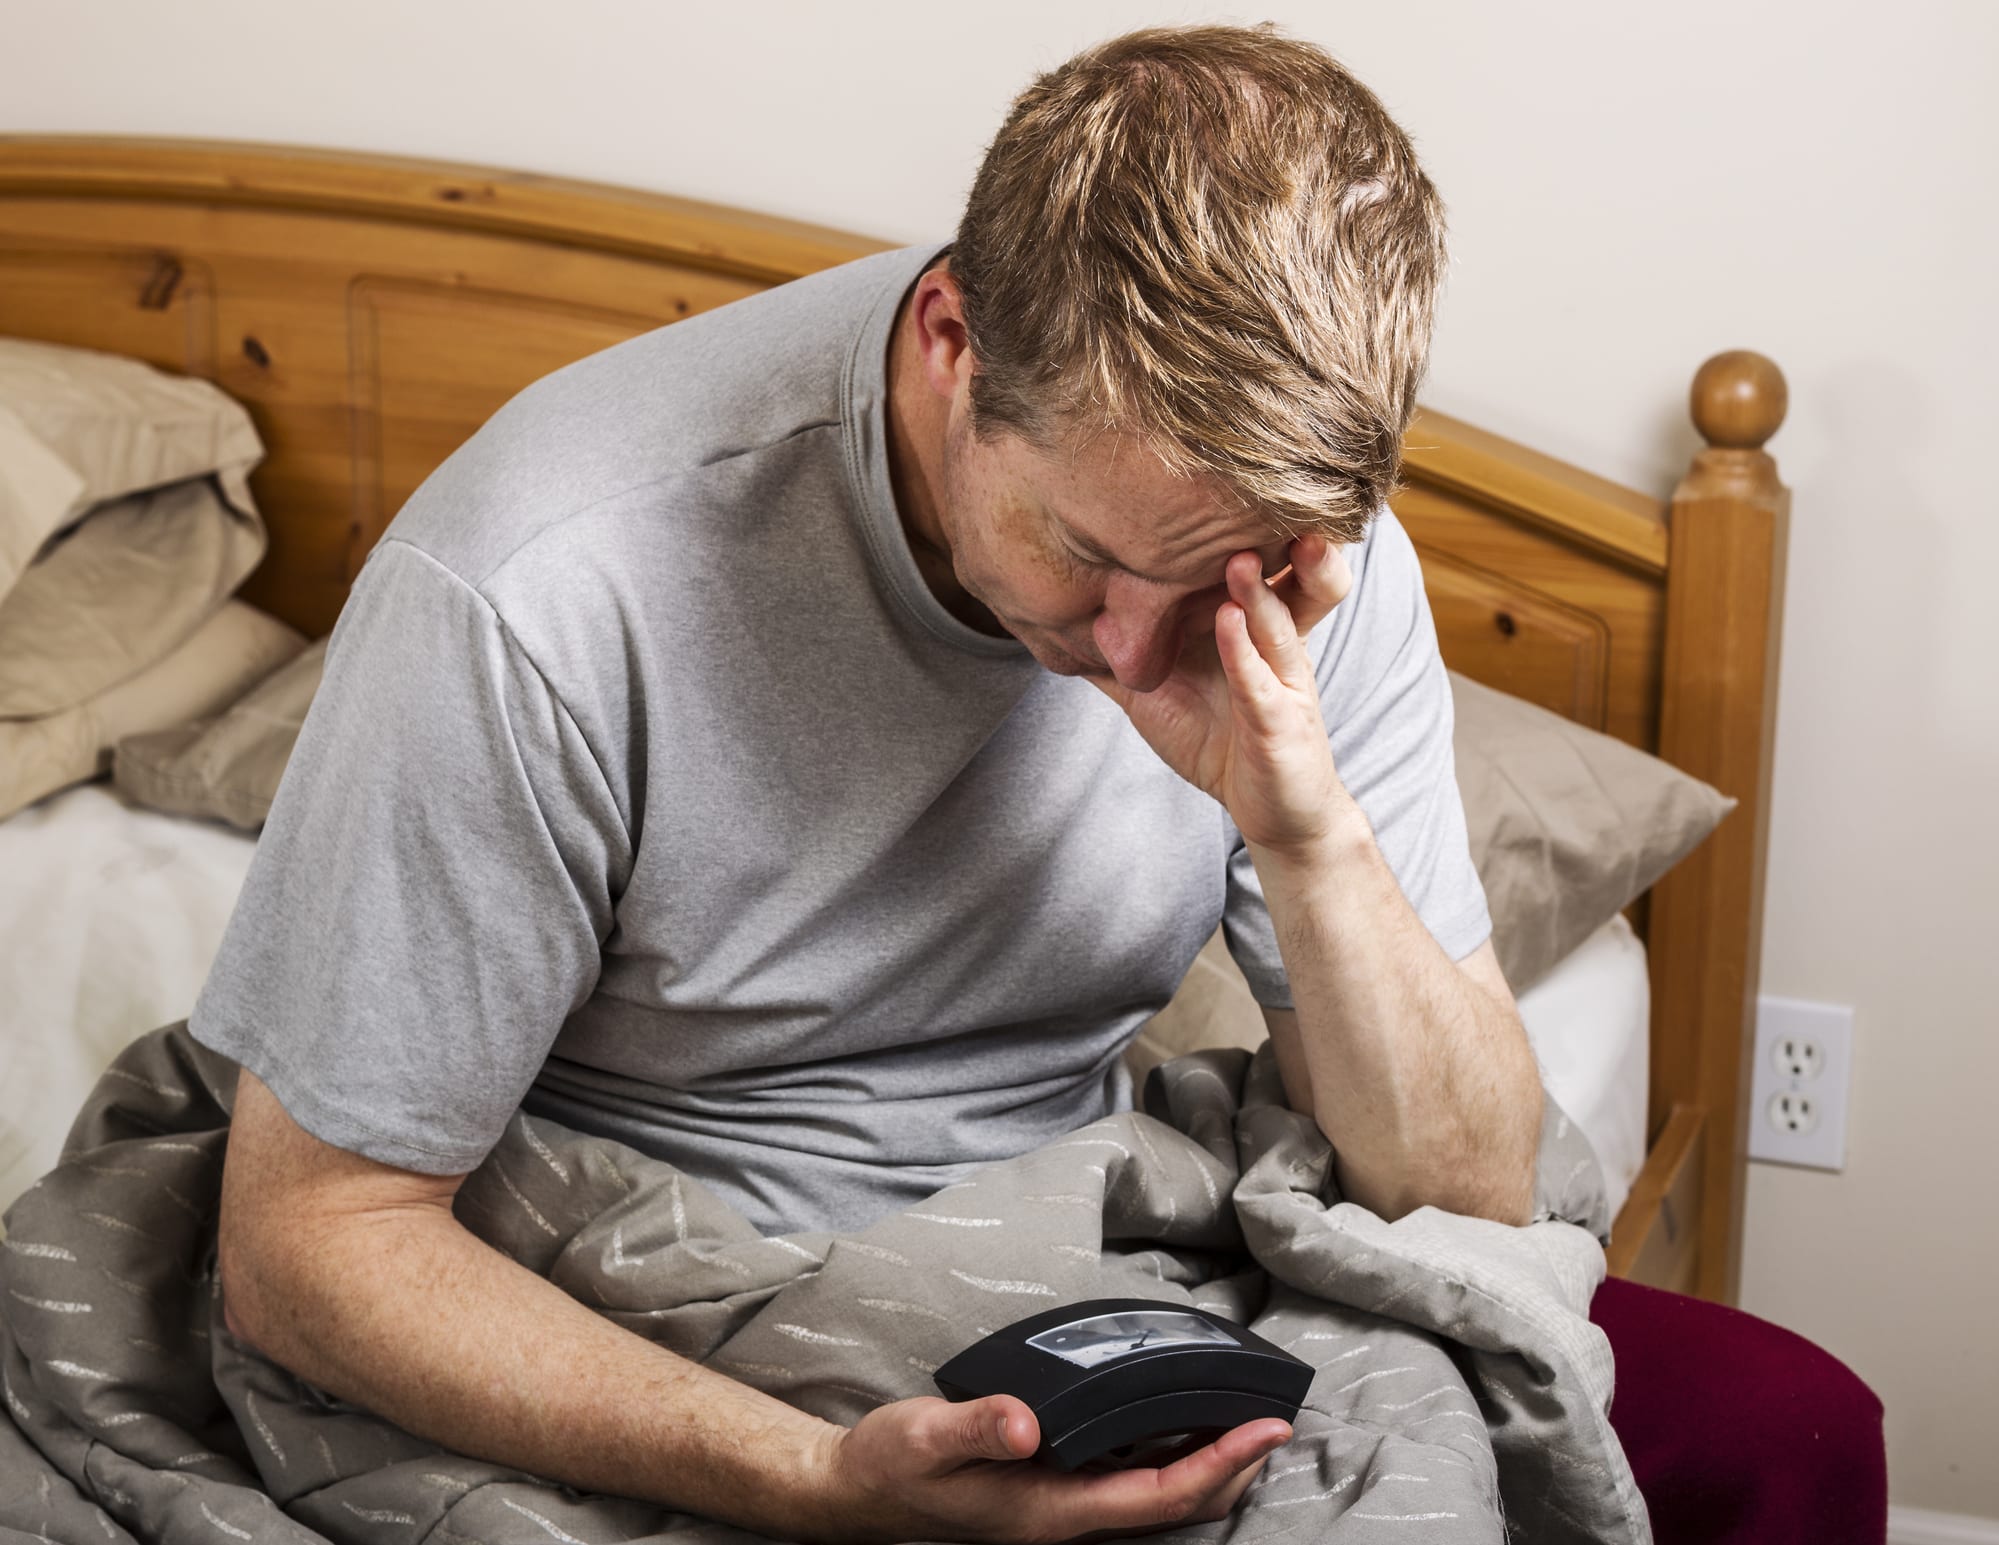 Blond man sitting in bed, looking tiredly at alarm clock